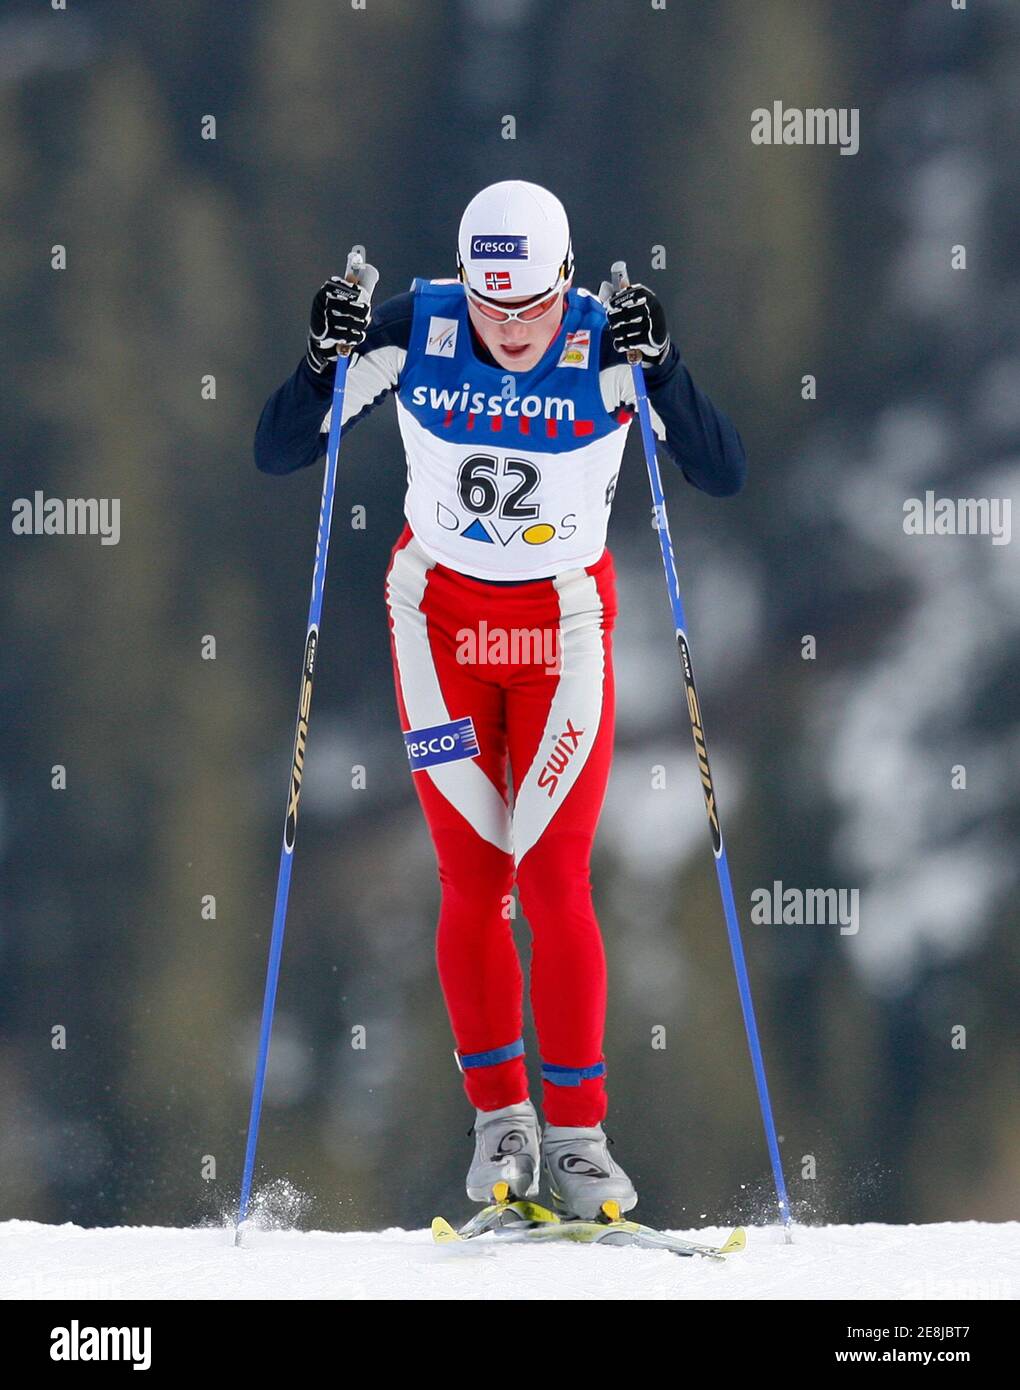 Tore Ruud Hofstad of Norway skis during the men's FIS World Cup cross-country skiing 15 km classical individual race in Davos, February 3, 2007.  REUTERS/Miro Kuzmanovic  (SWITZERLAND) Stock Photo